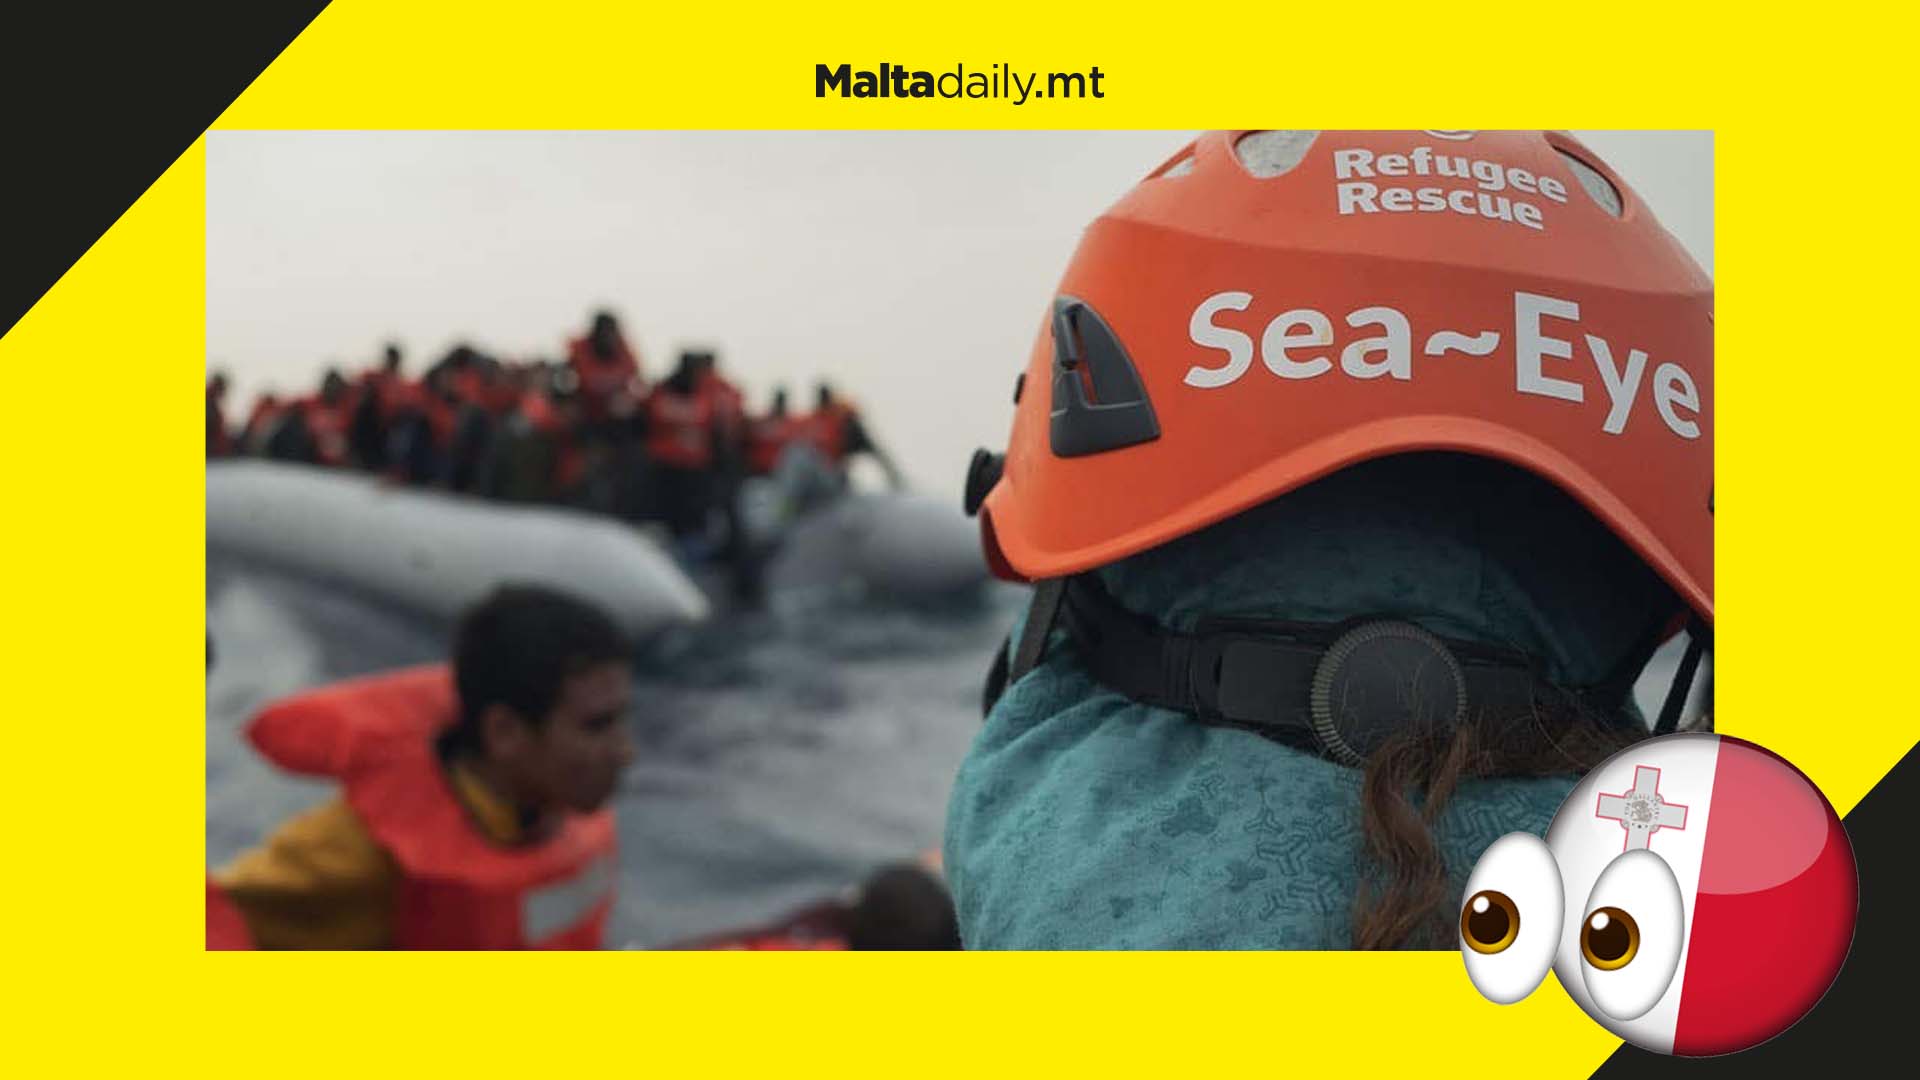 Malta refusing to coordinate rescues NGO hits out